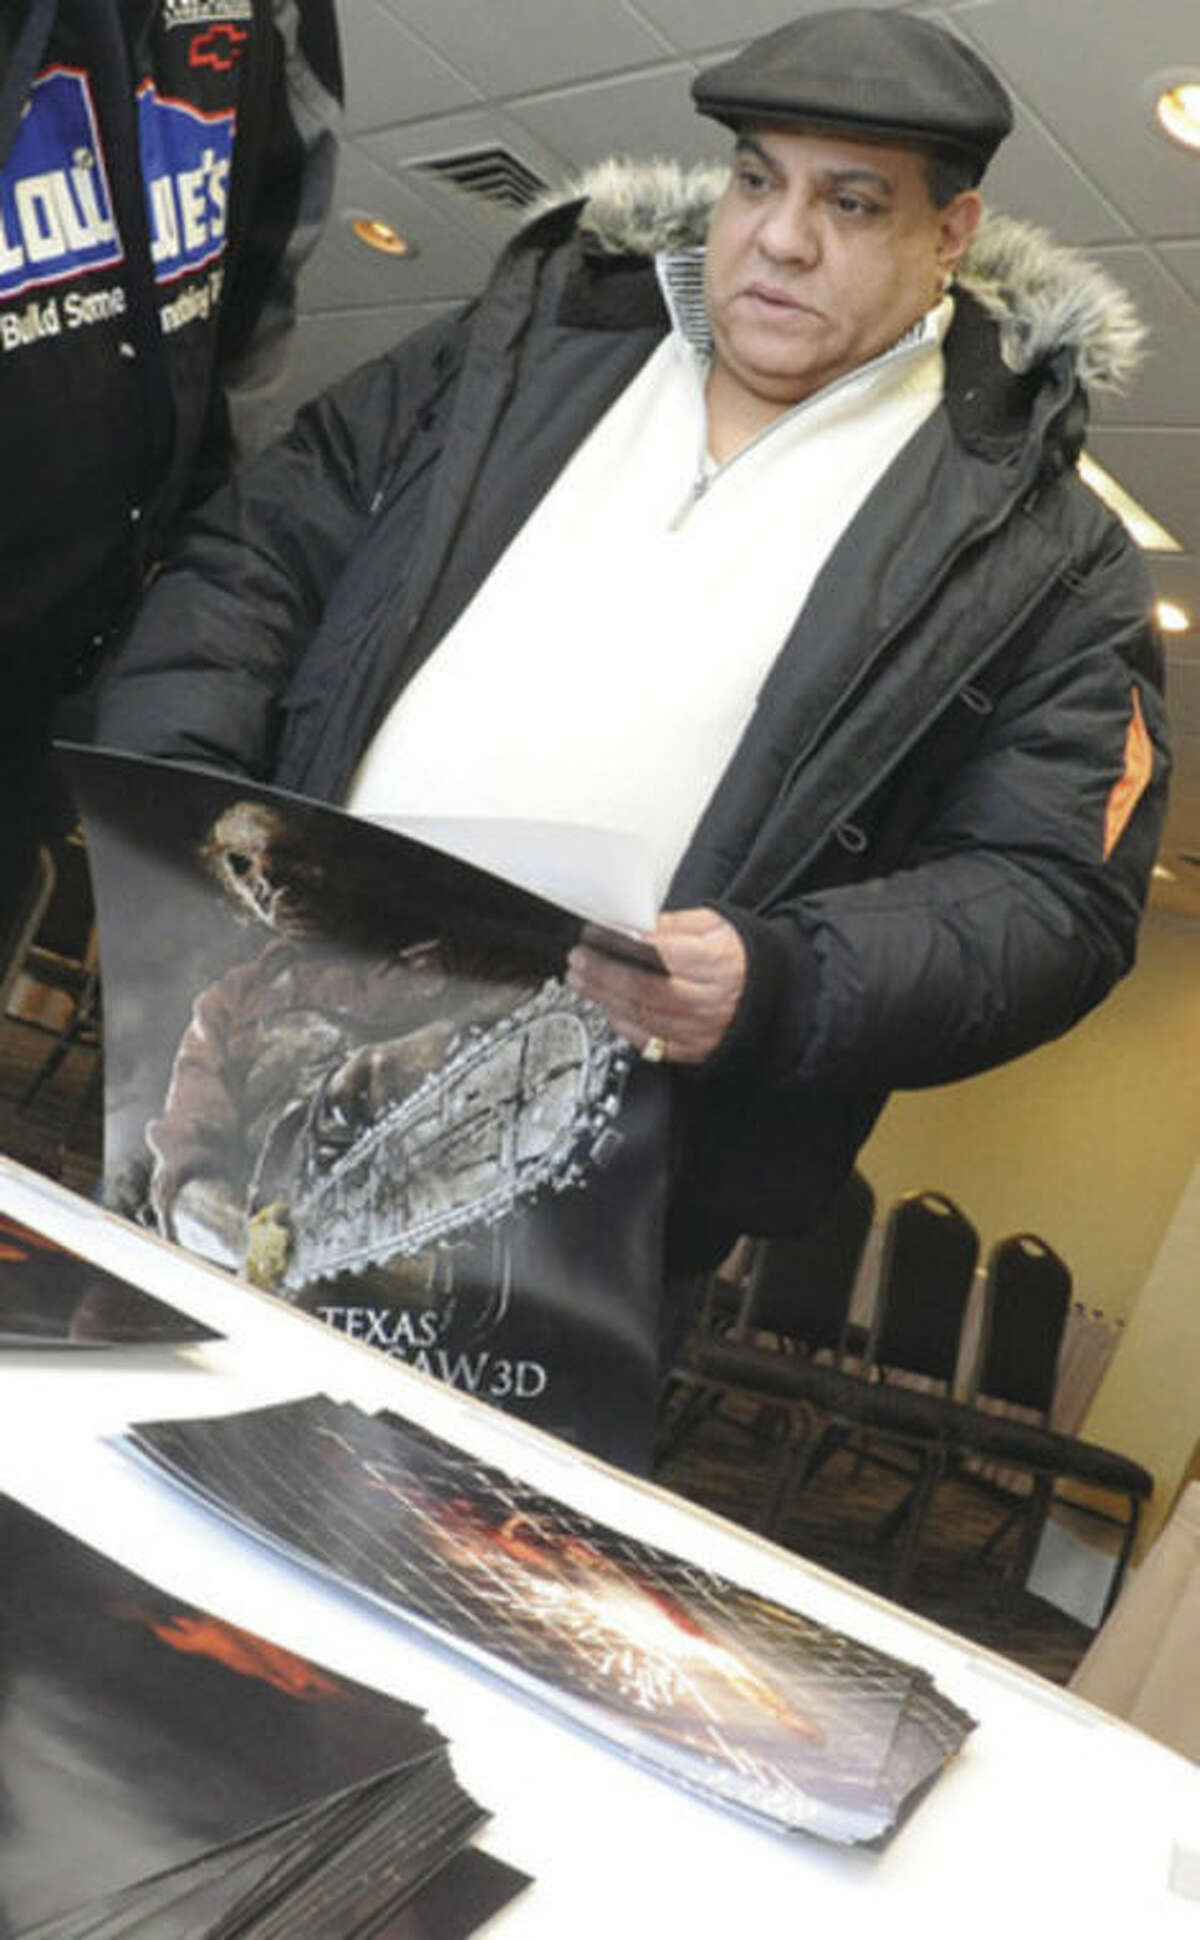 Eddie Rivera picks out a poster to get signed by actor Dan Yeager who plays Leatherface in the Texas Chainsaw films on Sunday at the Doubletree hotel in Norwalk. hour photo/Matthew Vinci